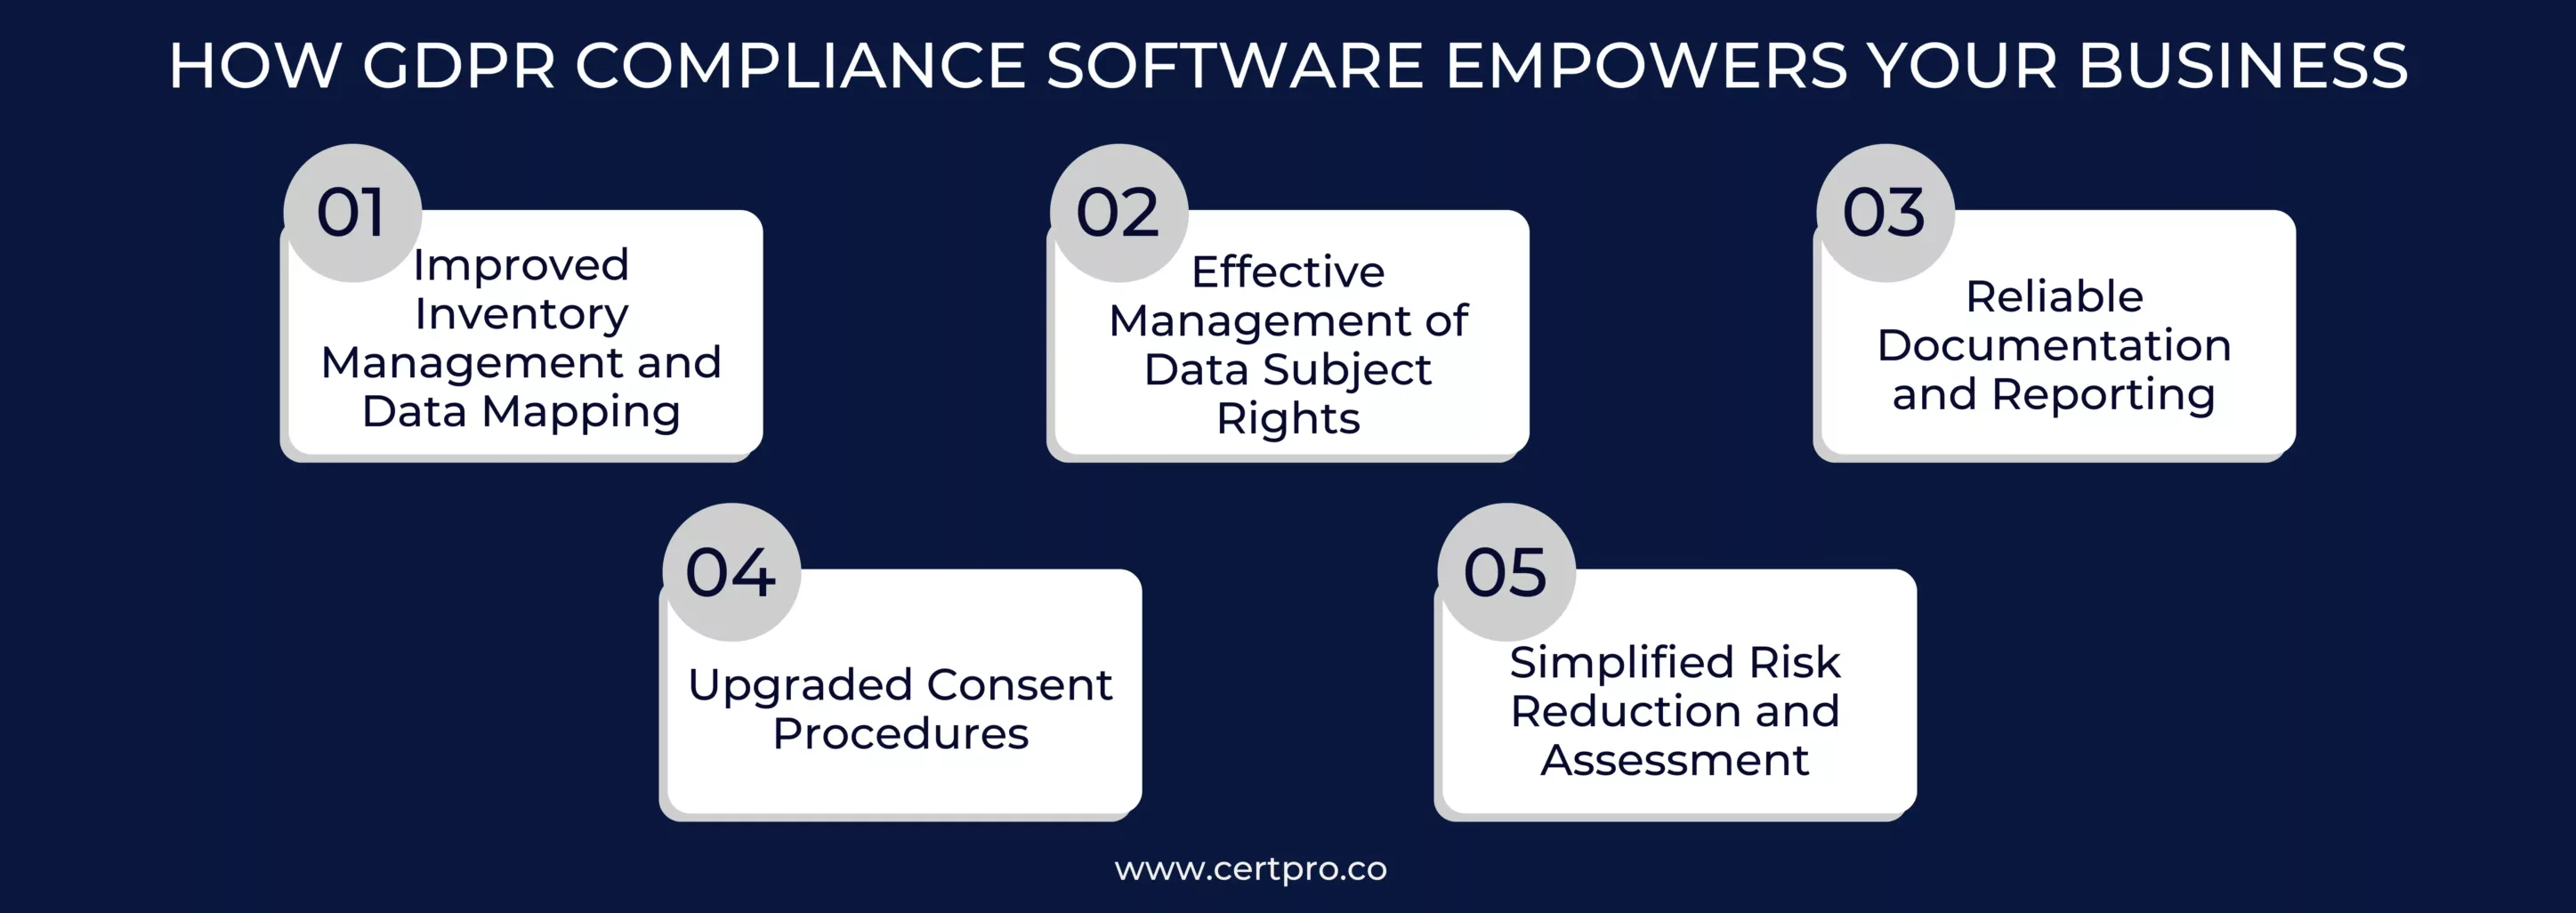 HOW GDPR COMPLIANCE SOFTWARE EMPOWERS YOUR BUSINESS